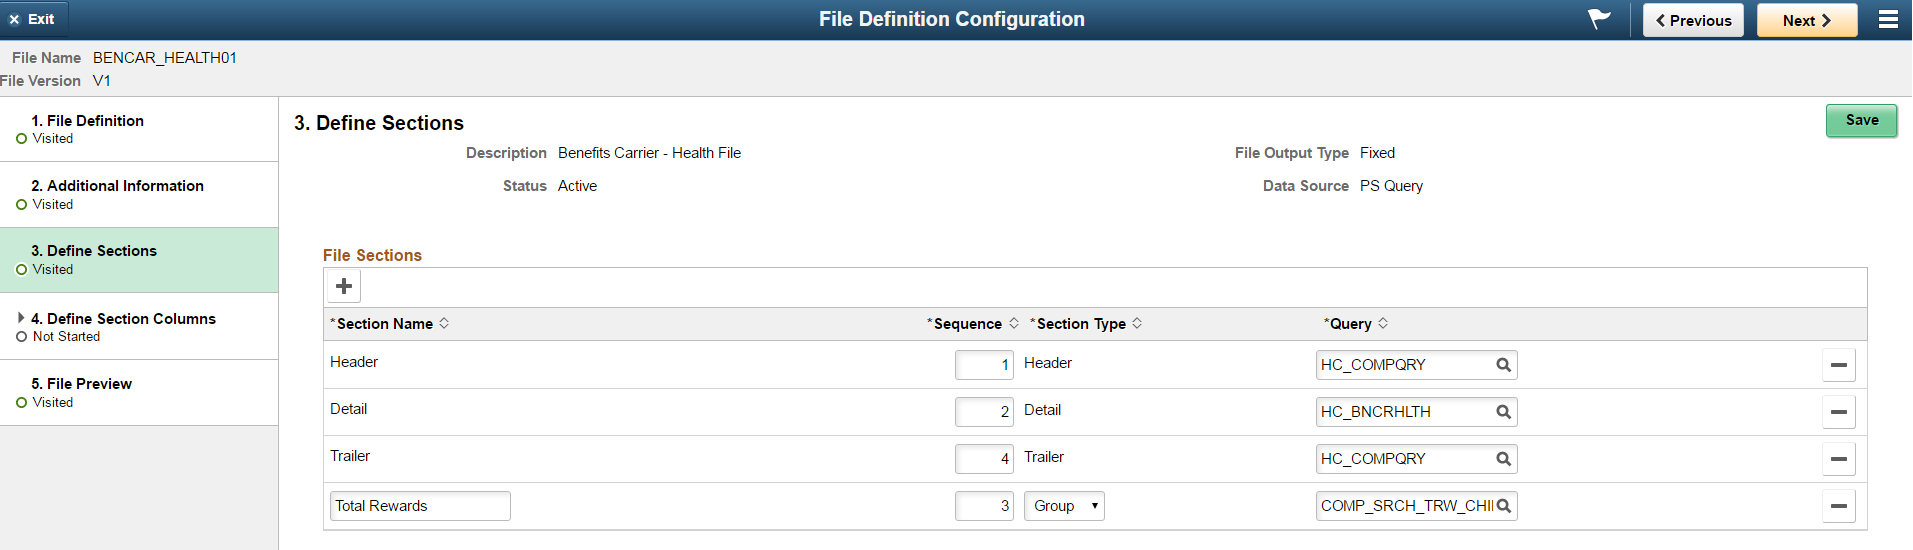 File Definition Configuration - Define Sections Page